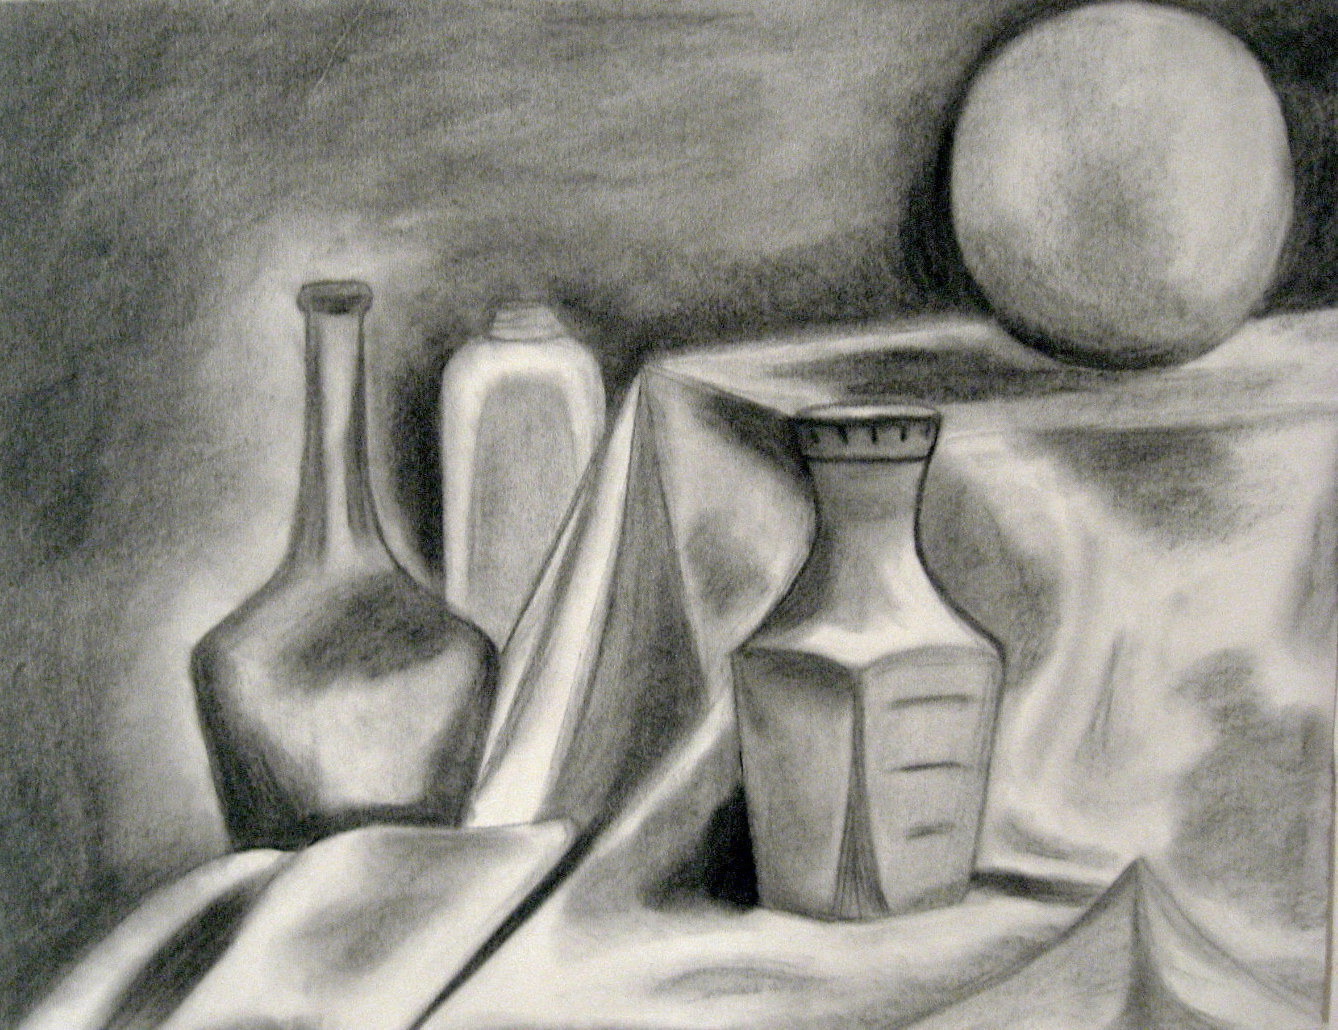 Charcoal drawing for beginners: how to create charcoal art - Gathered